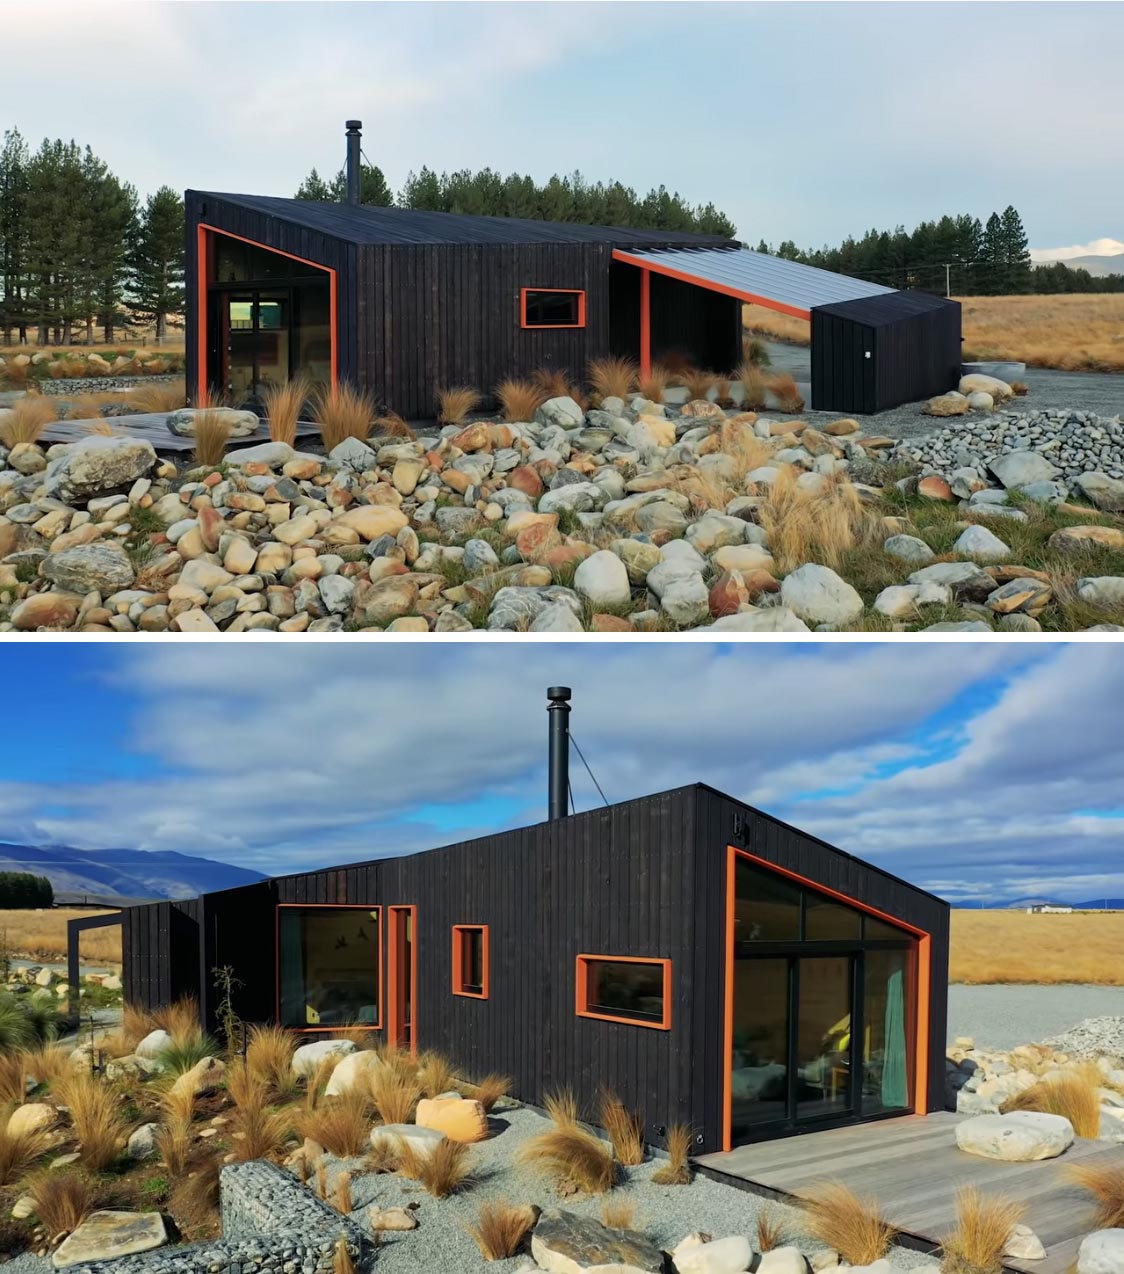 A tiny house with burnt wood siding and contrasting orange window frames.